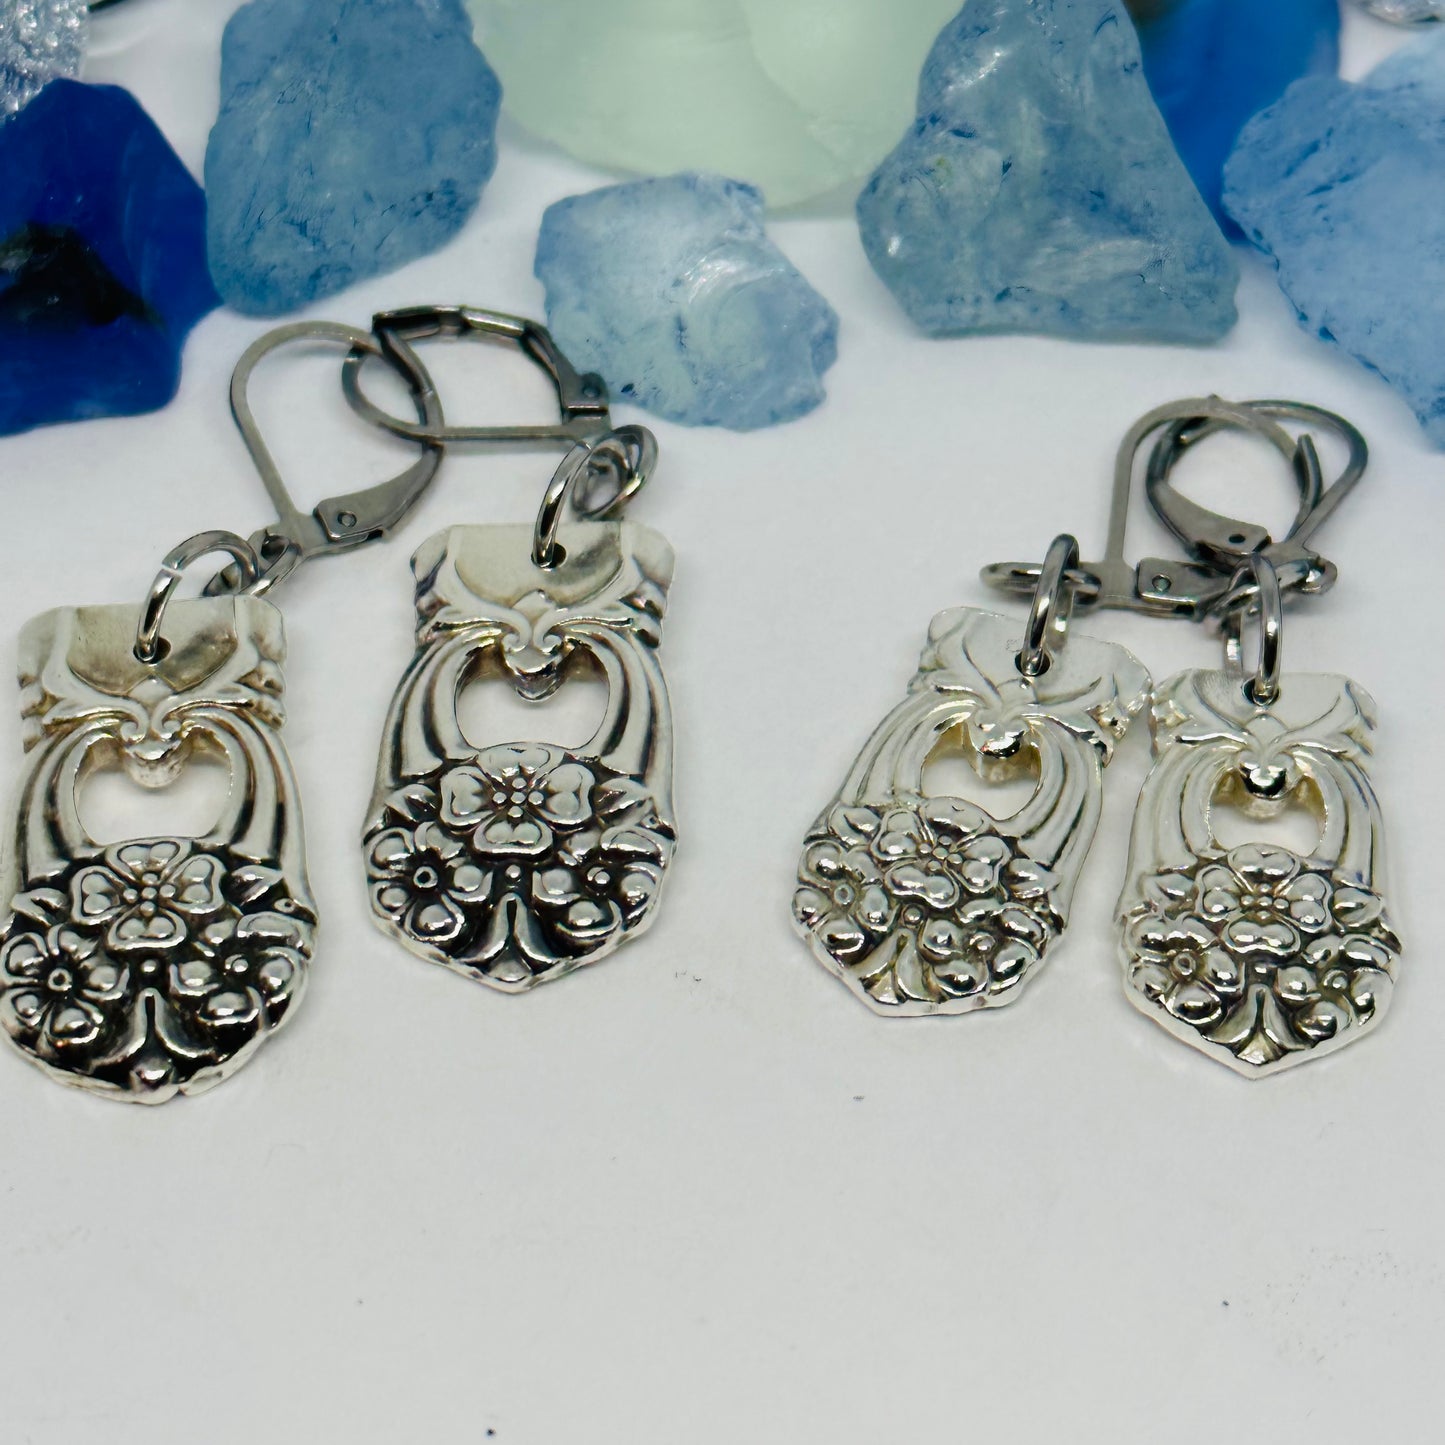 “Eternally Yours” 1941 Vintage Silverware Spoon Earrings | Up-Cycled Jewelry | Antique